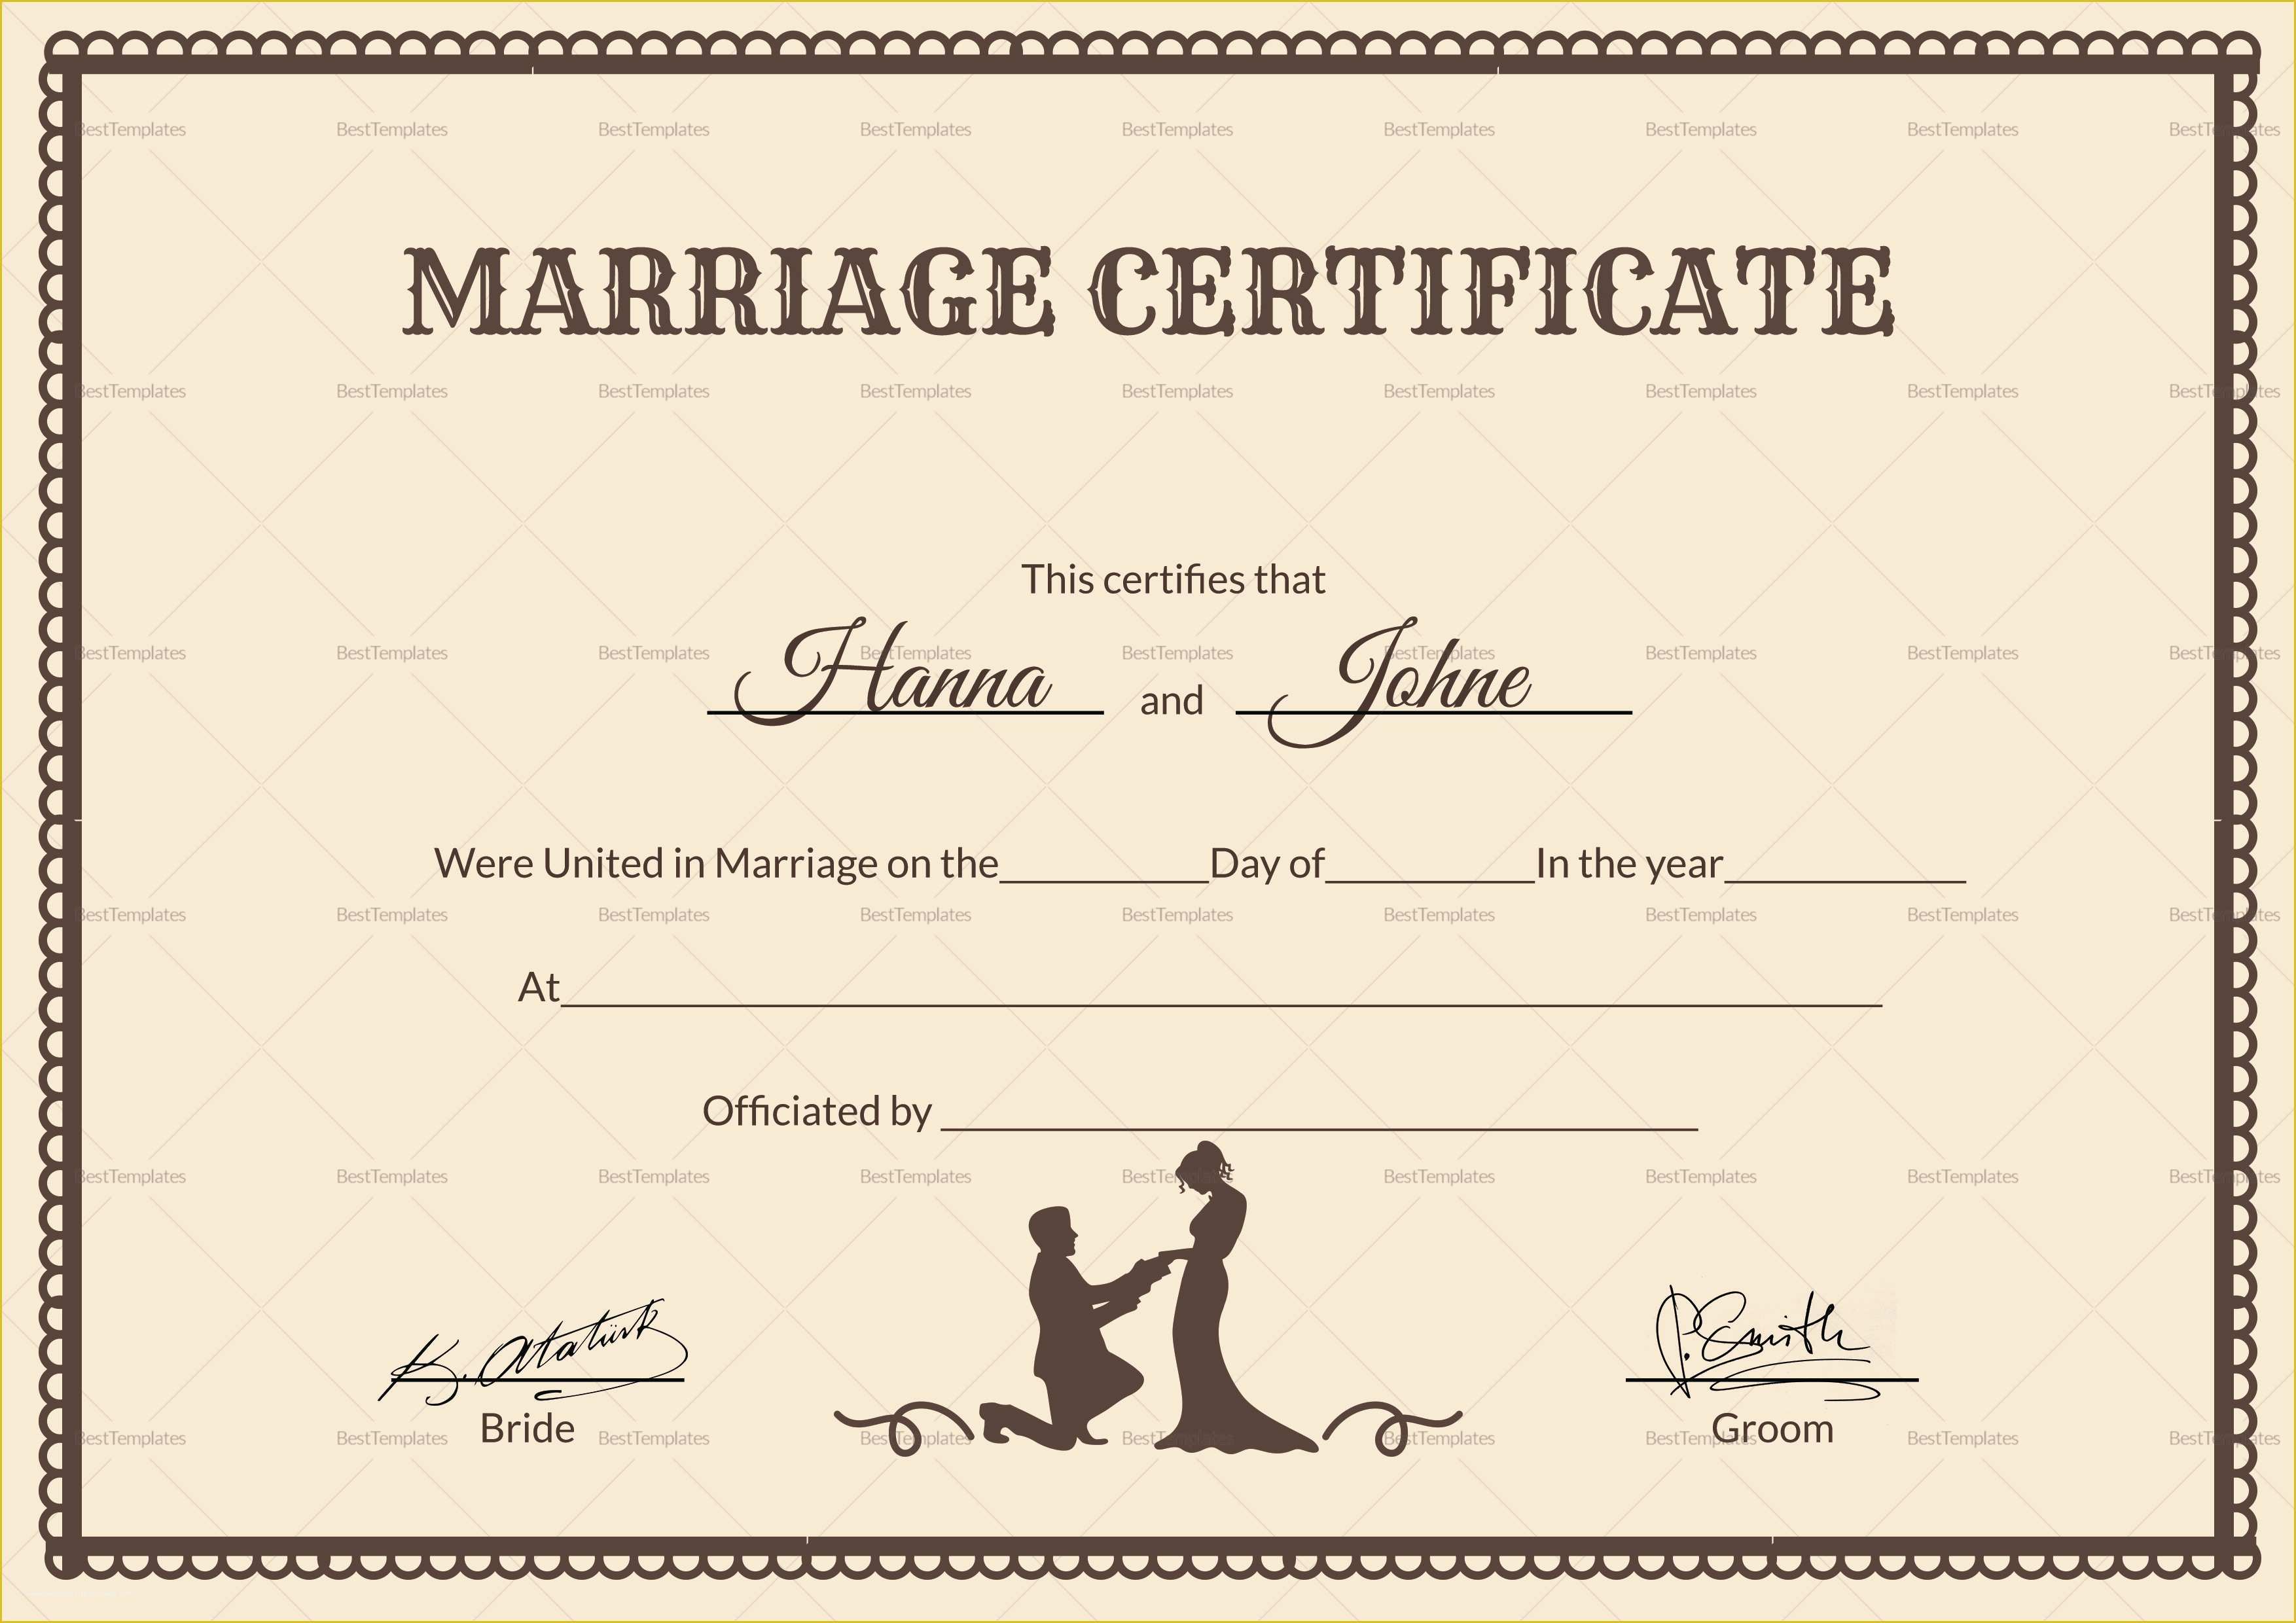 Free Marriage Certificate Template Word Of islamic Marriage Certificate ...